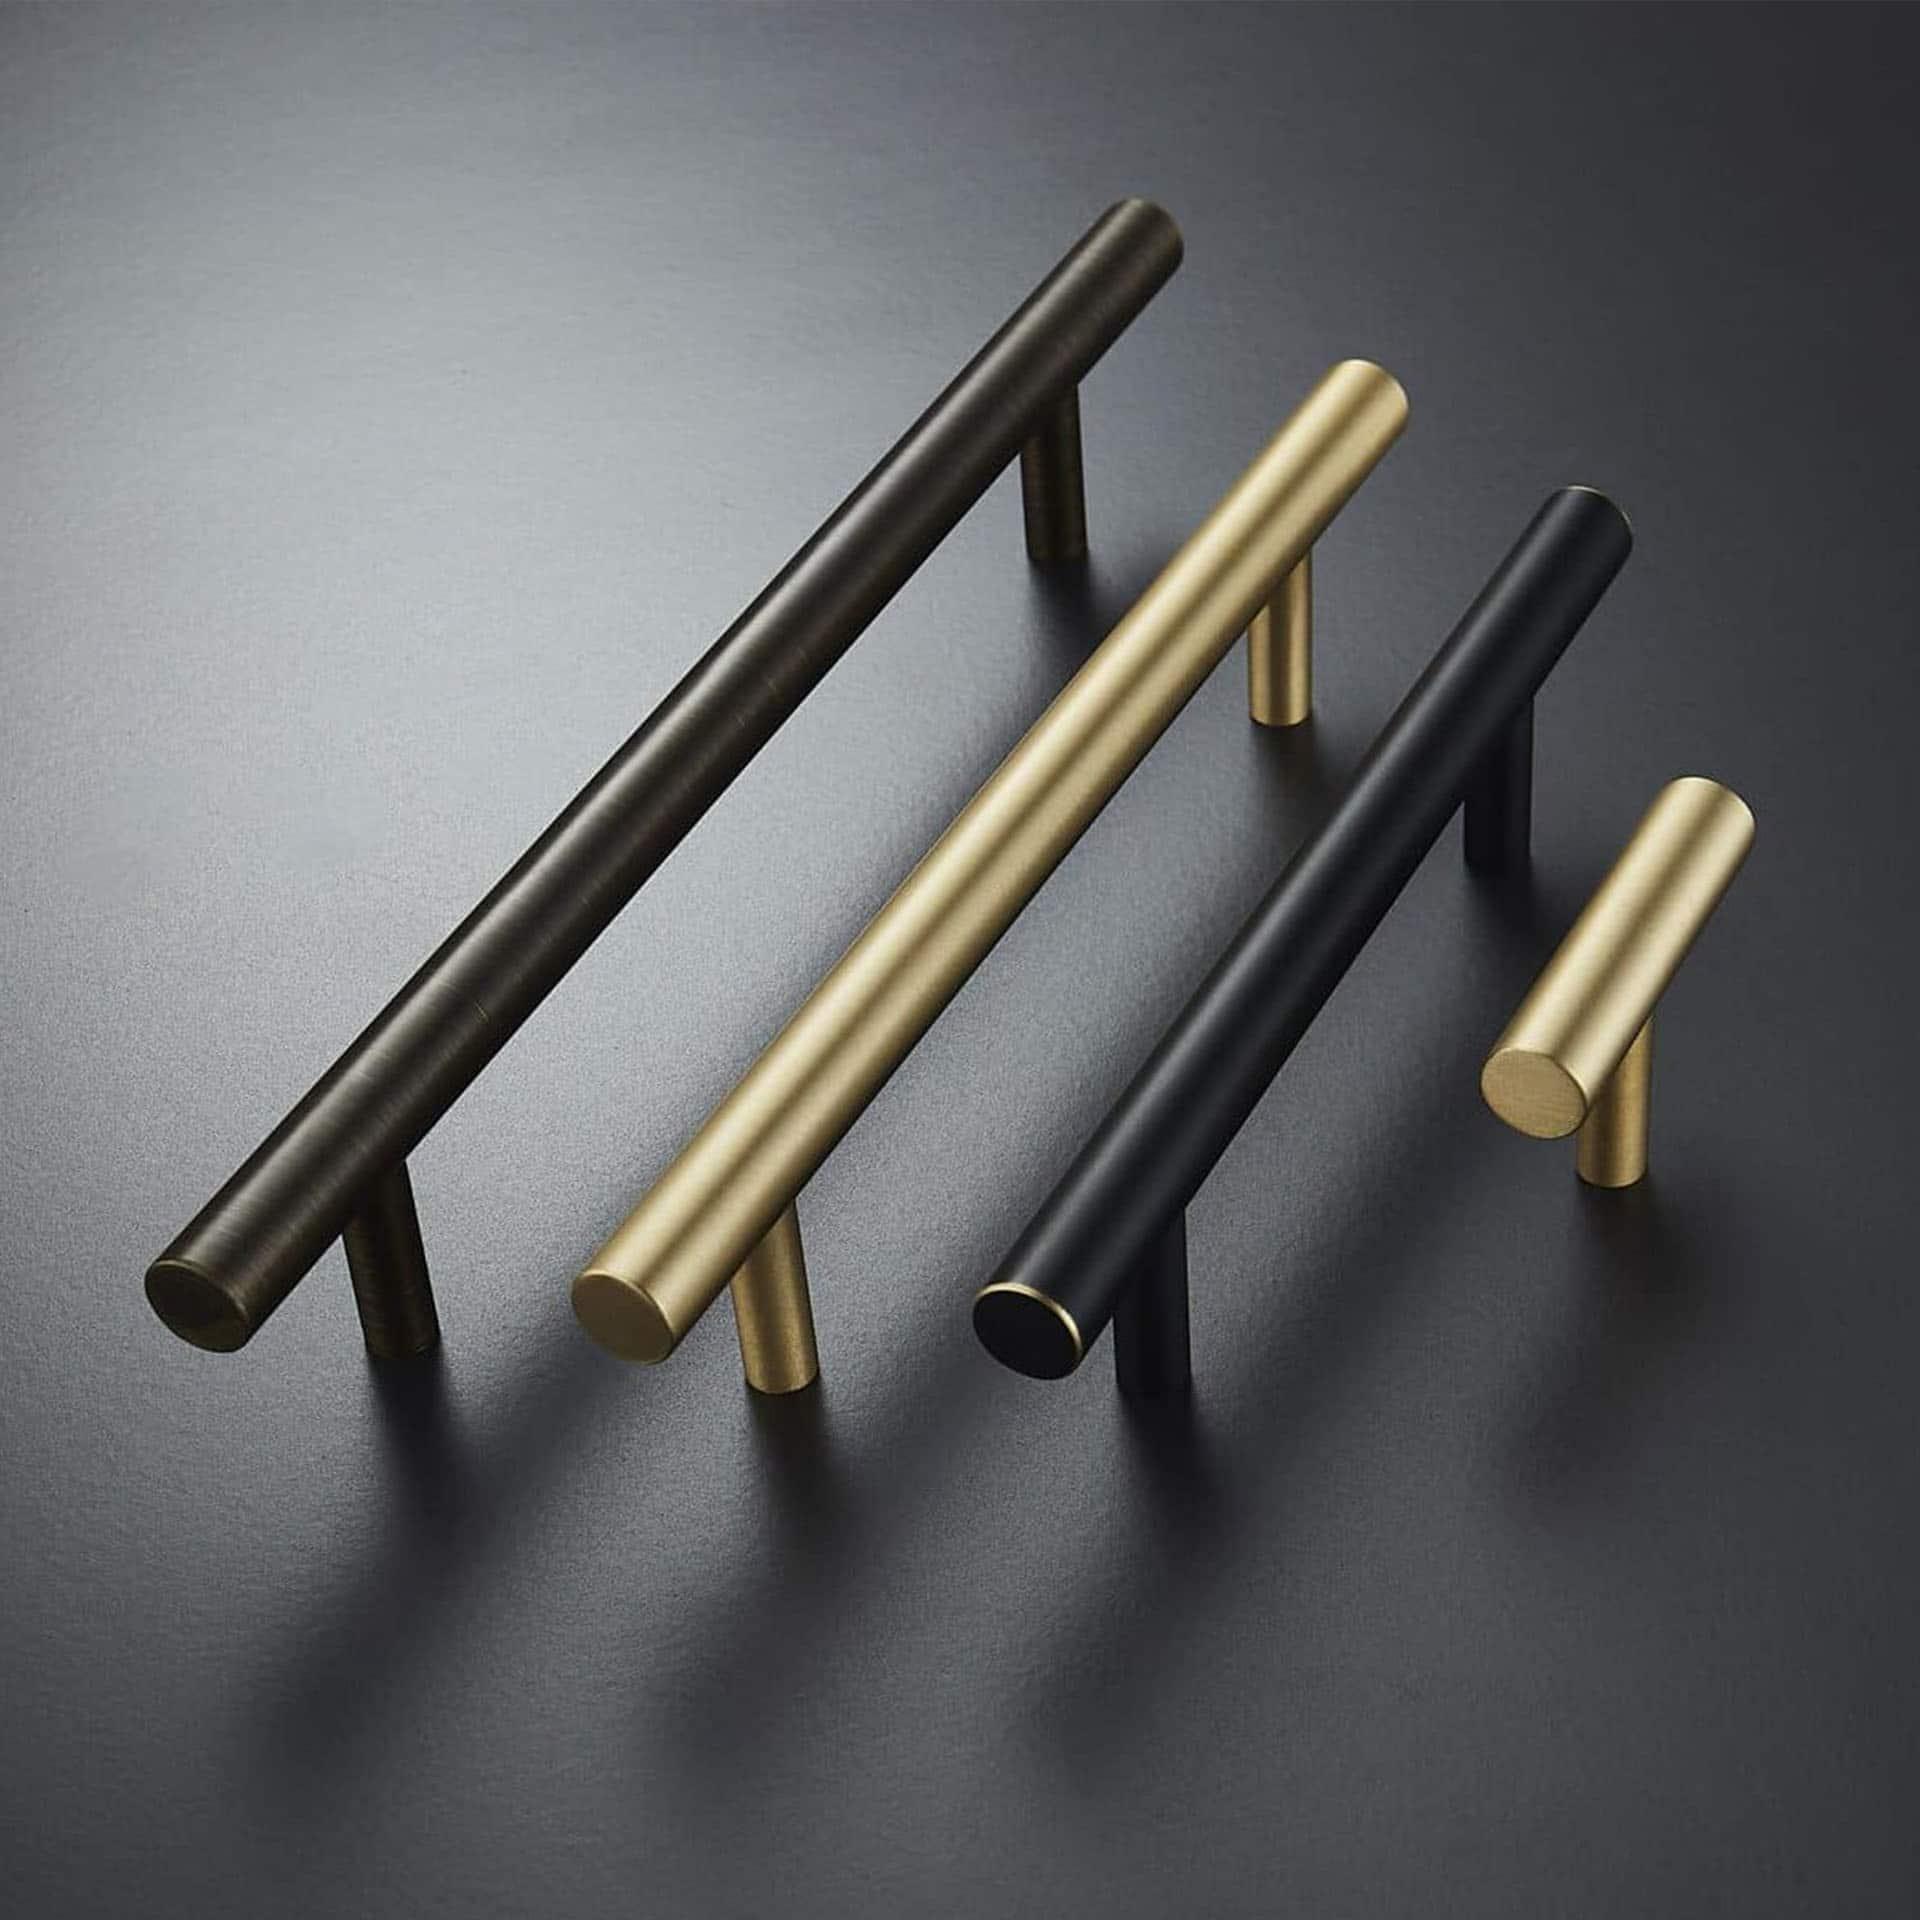 TRACY / Solid Brass Handles - Handle Shop Couture 